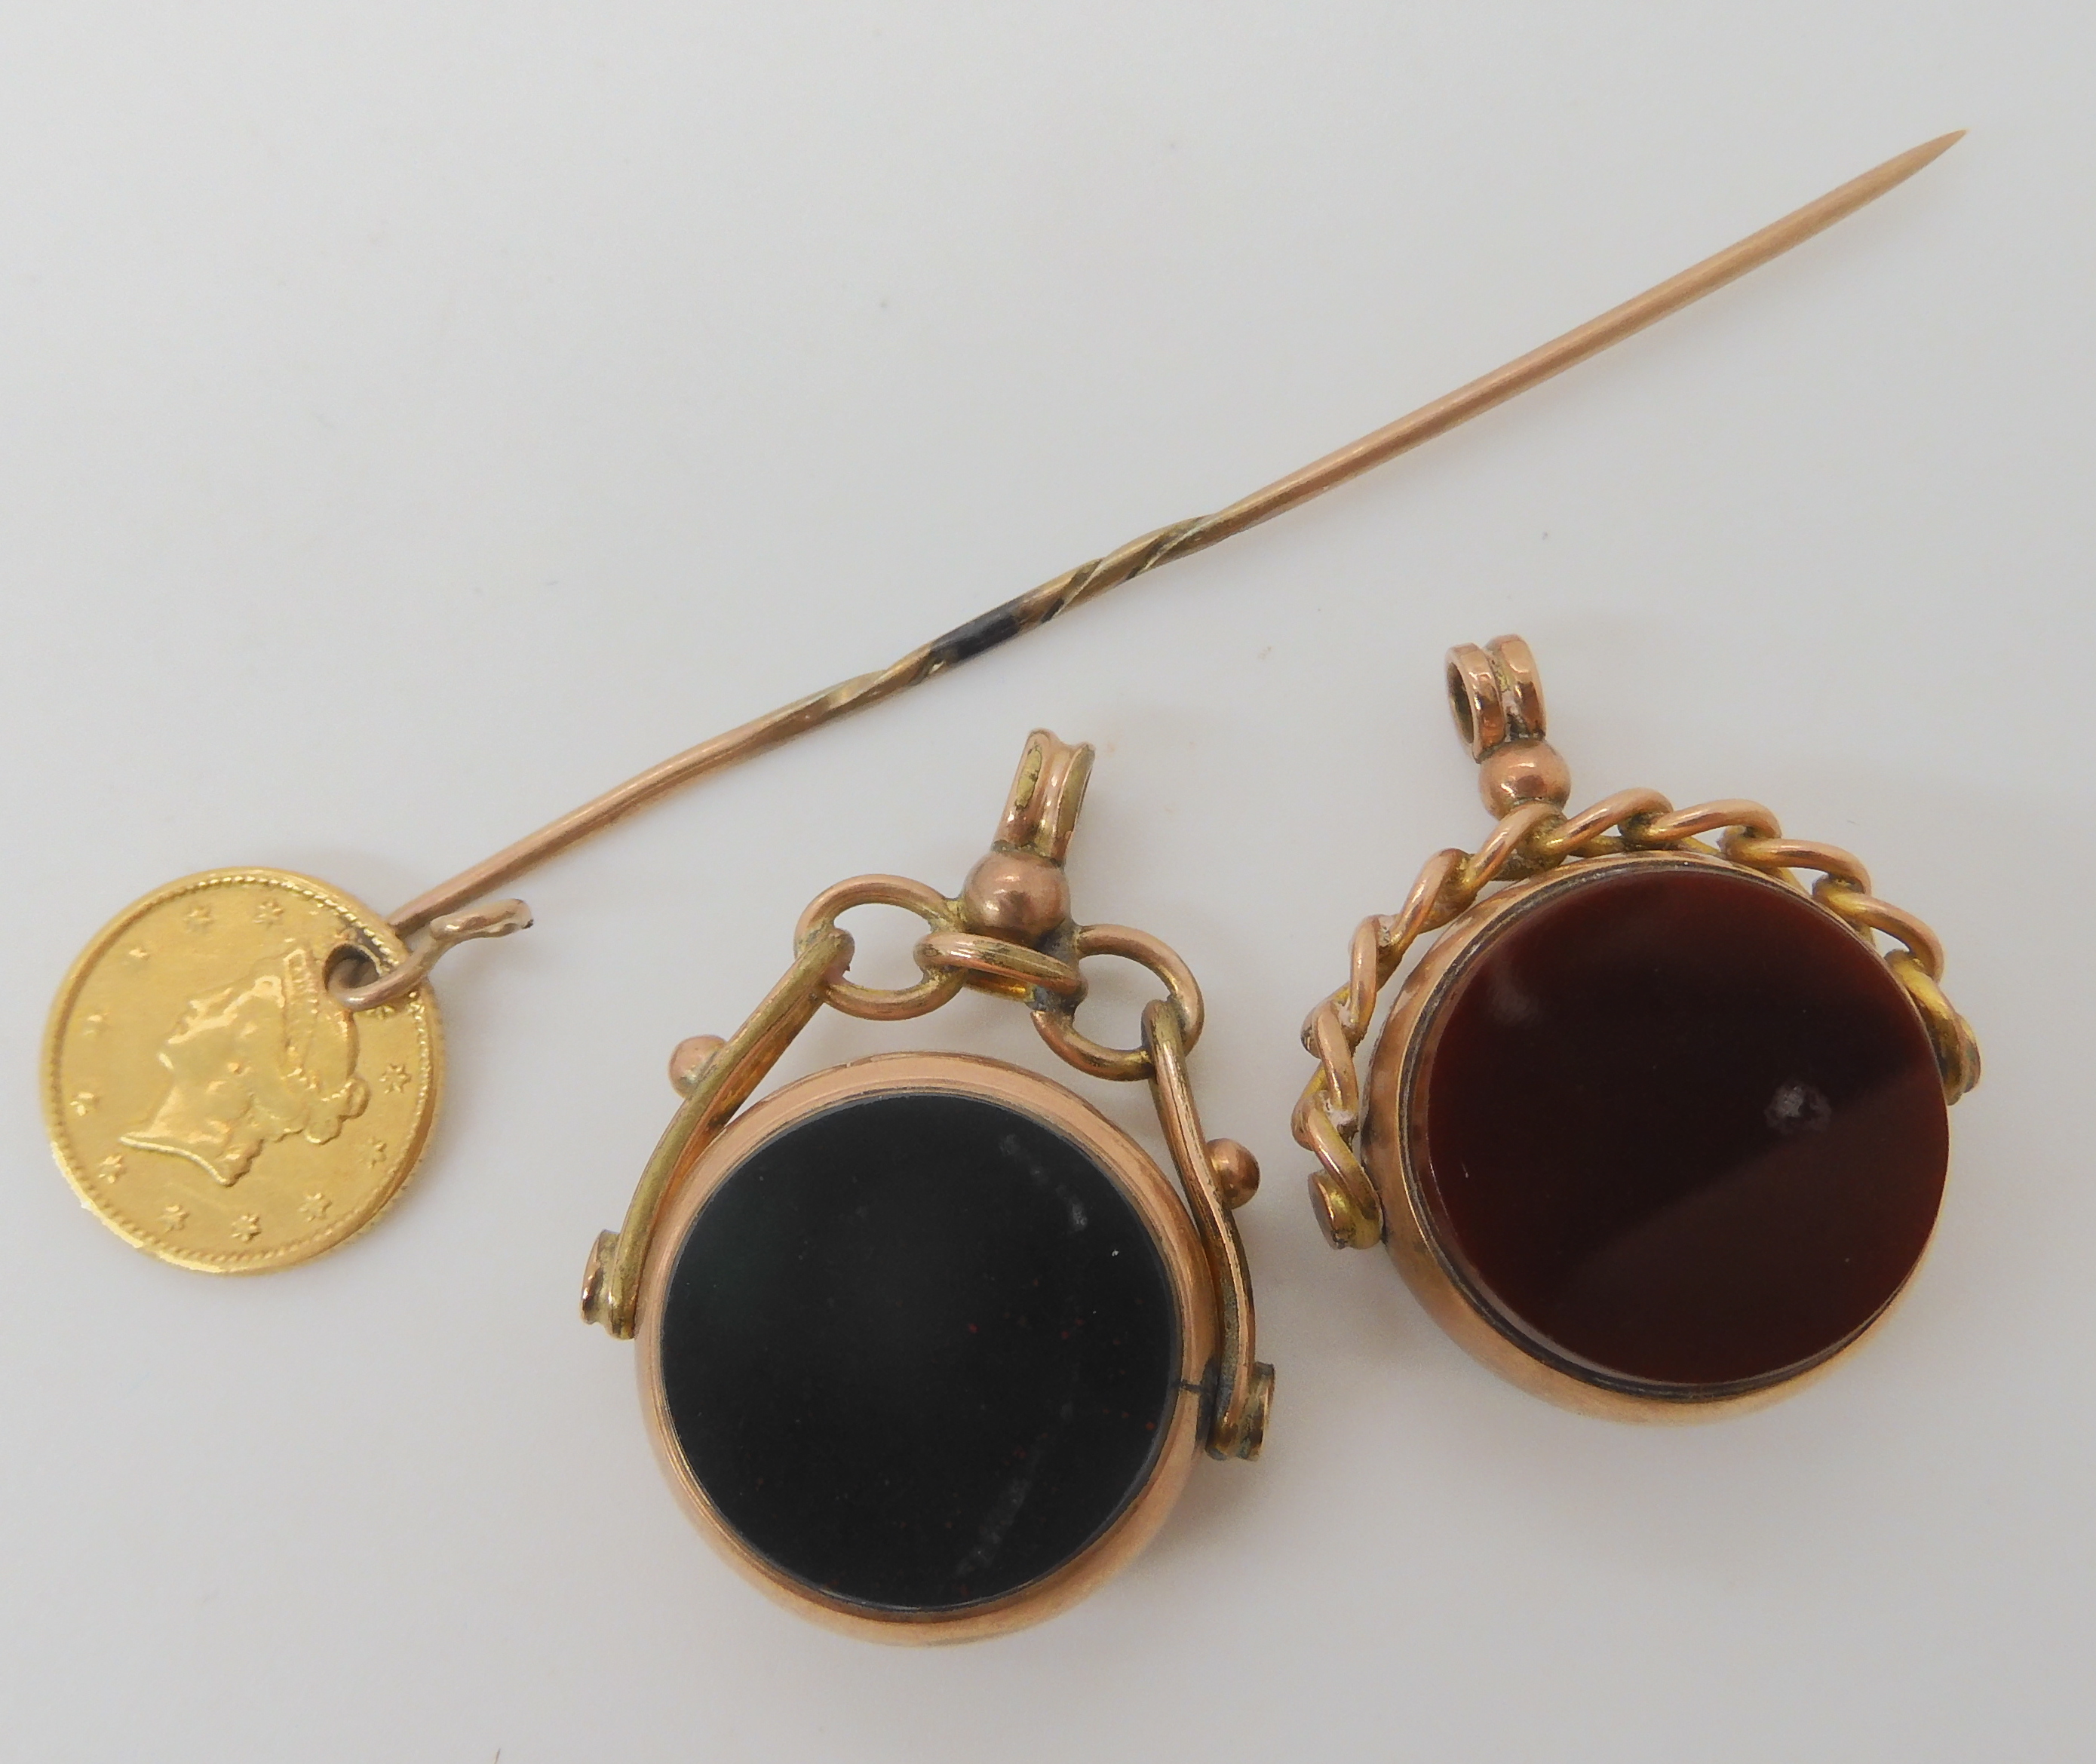 Two 9ct gold double sided agate fob seals, and a stick pin with an attached 1853 1 dollar USA